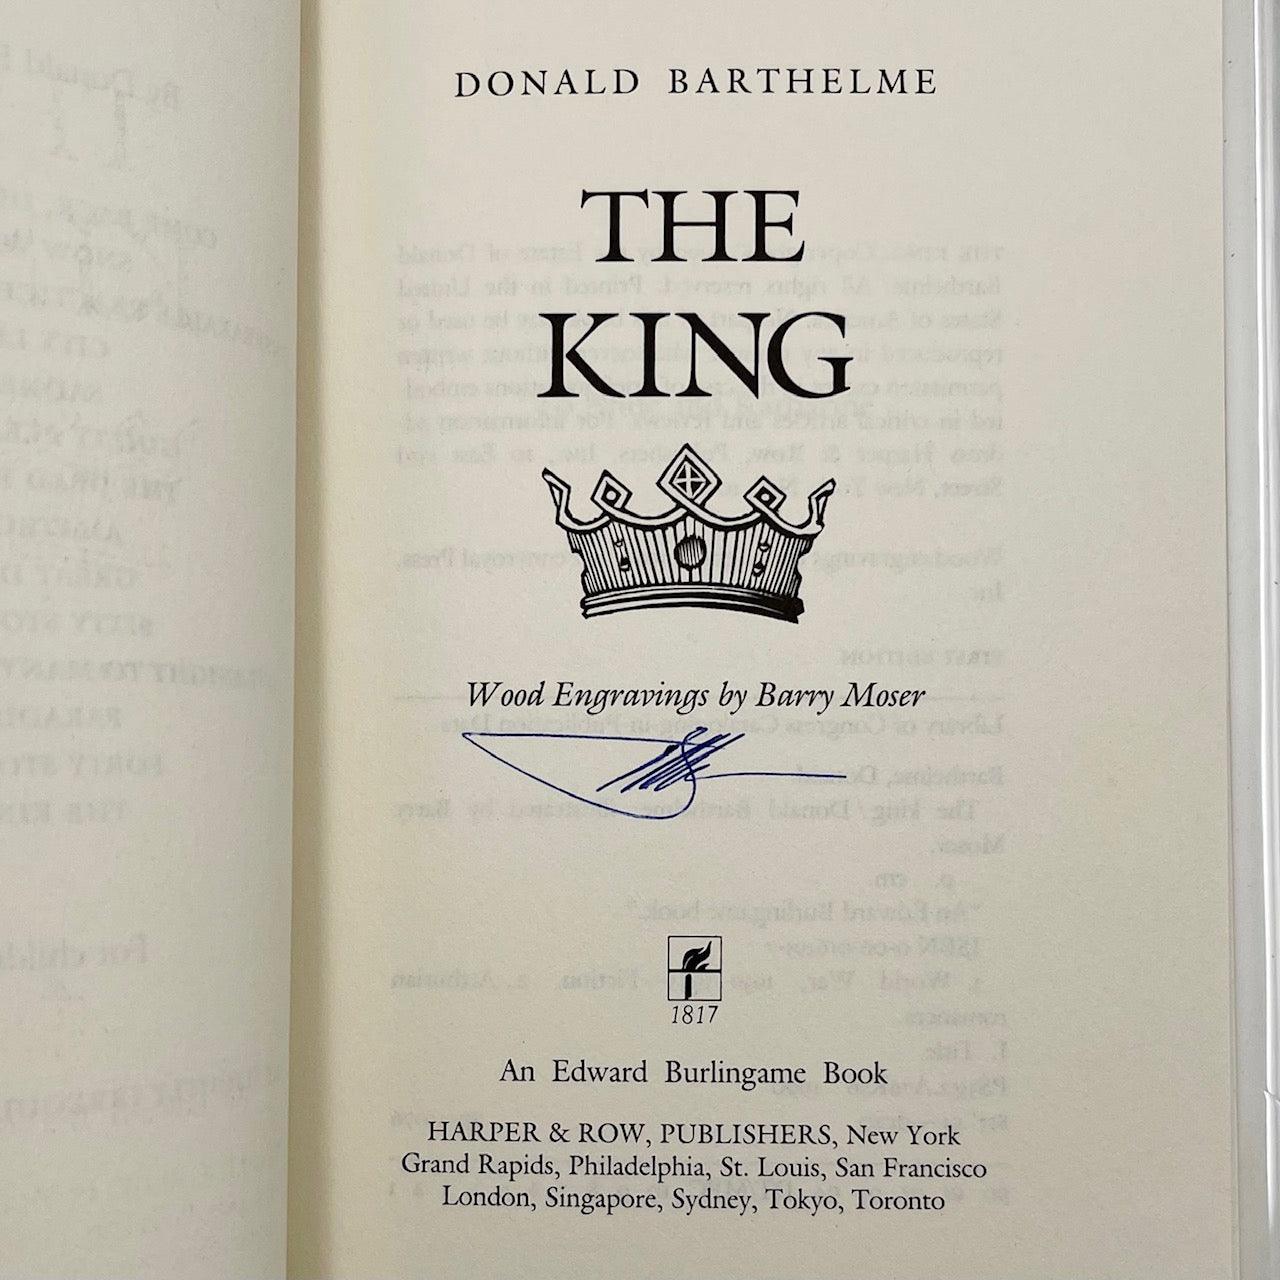 The King (signed by Barry Moser) - Grinning Cat Books - LITERATURE - BARRY MOSER